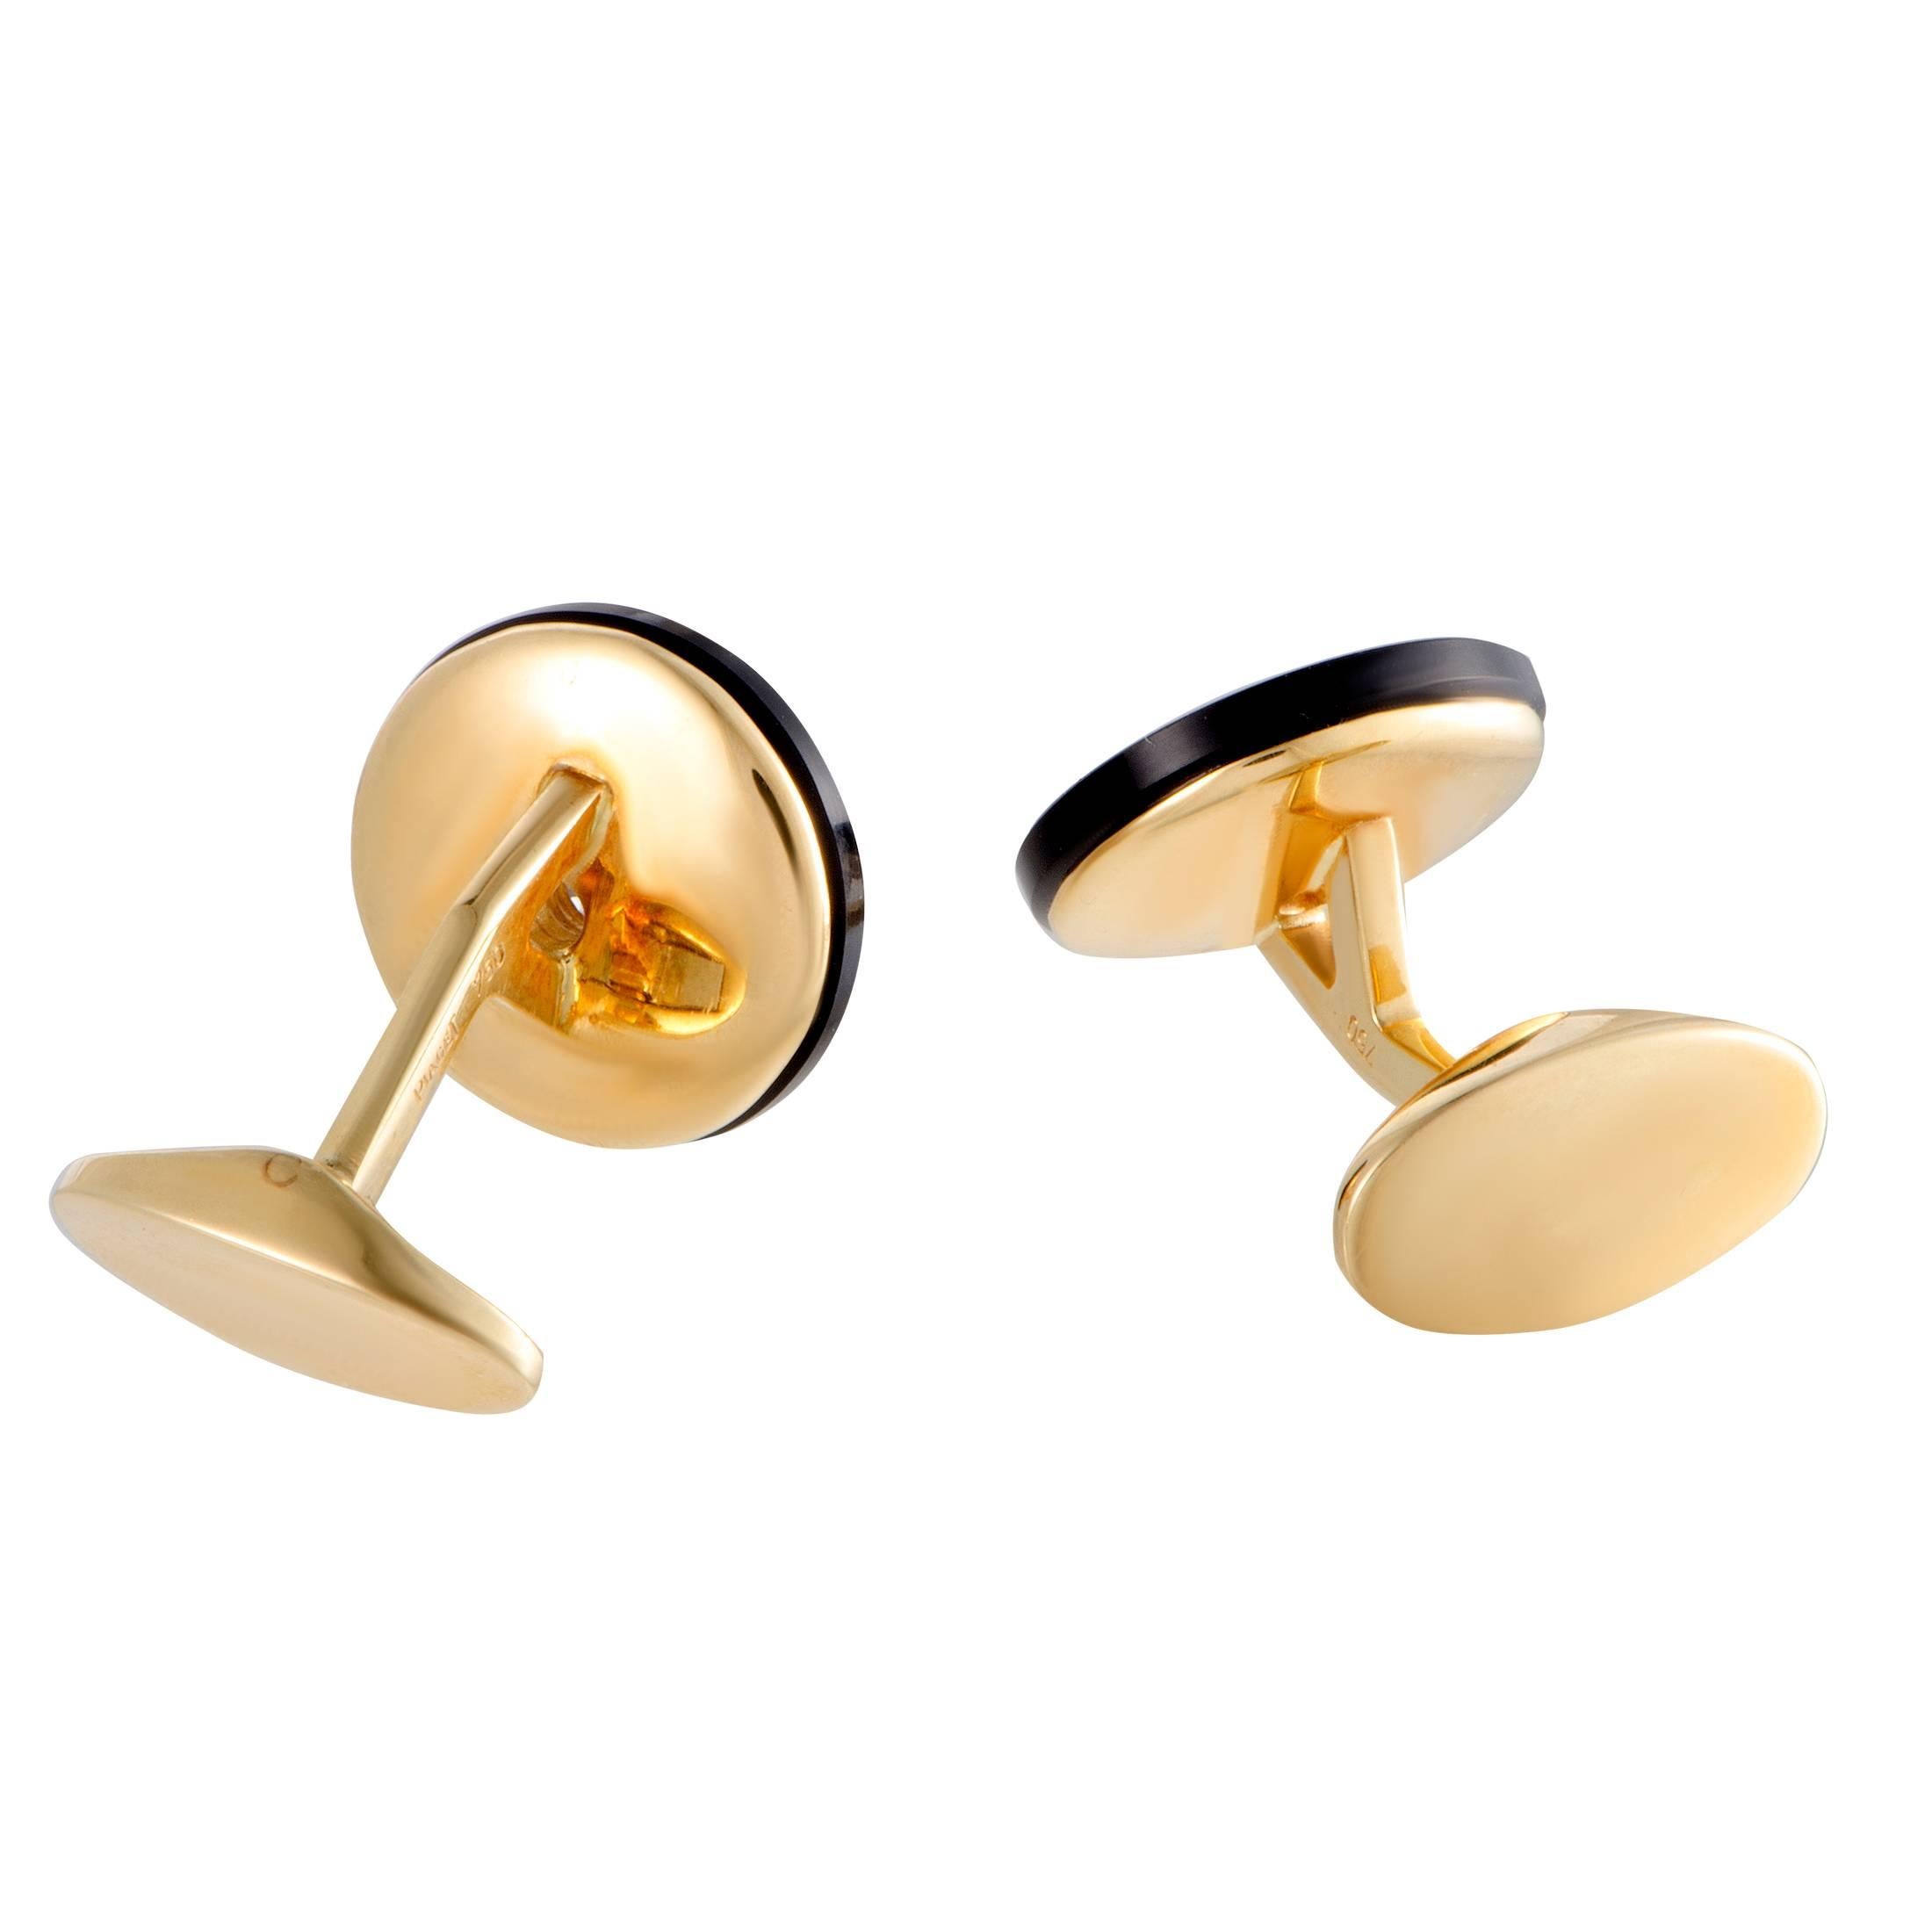 These vintage cufflinks by Piaget are chicly designed in glistening 18K yellow gold. The stunning pair of cufflinks feature 0.60ct of sparkling diamonds and glamorous onyx stones in its classy design that gives it an elegantly charming appeal.
